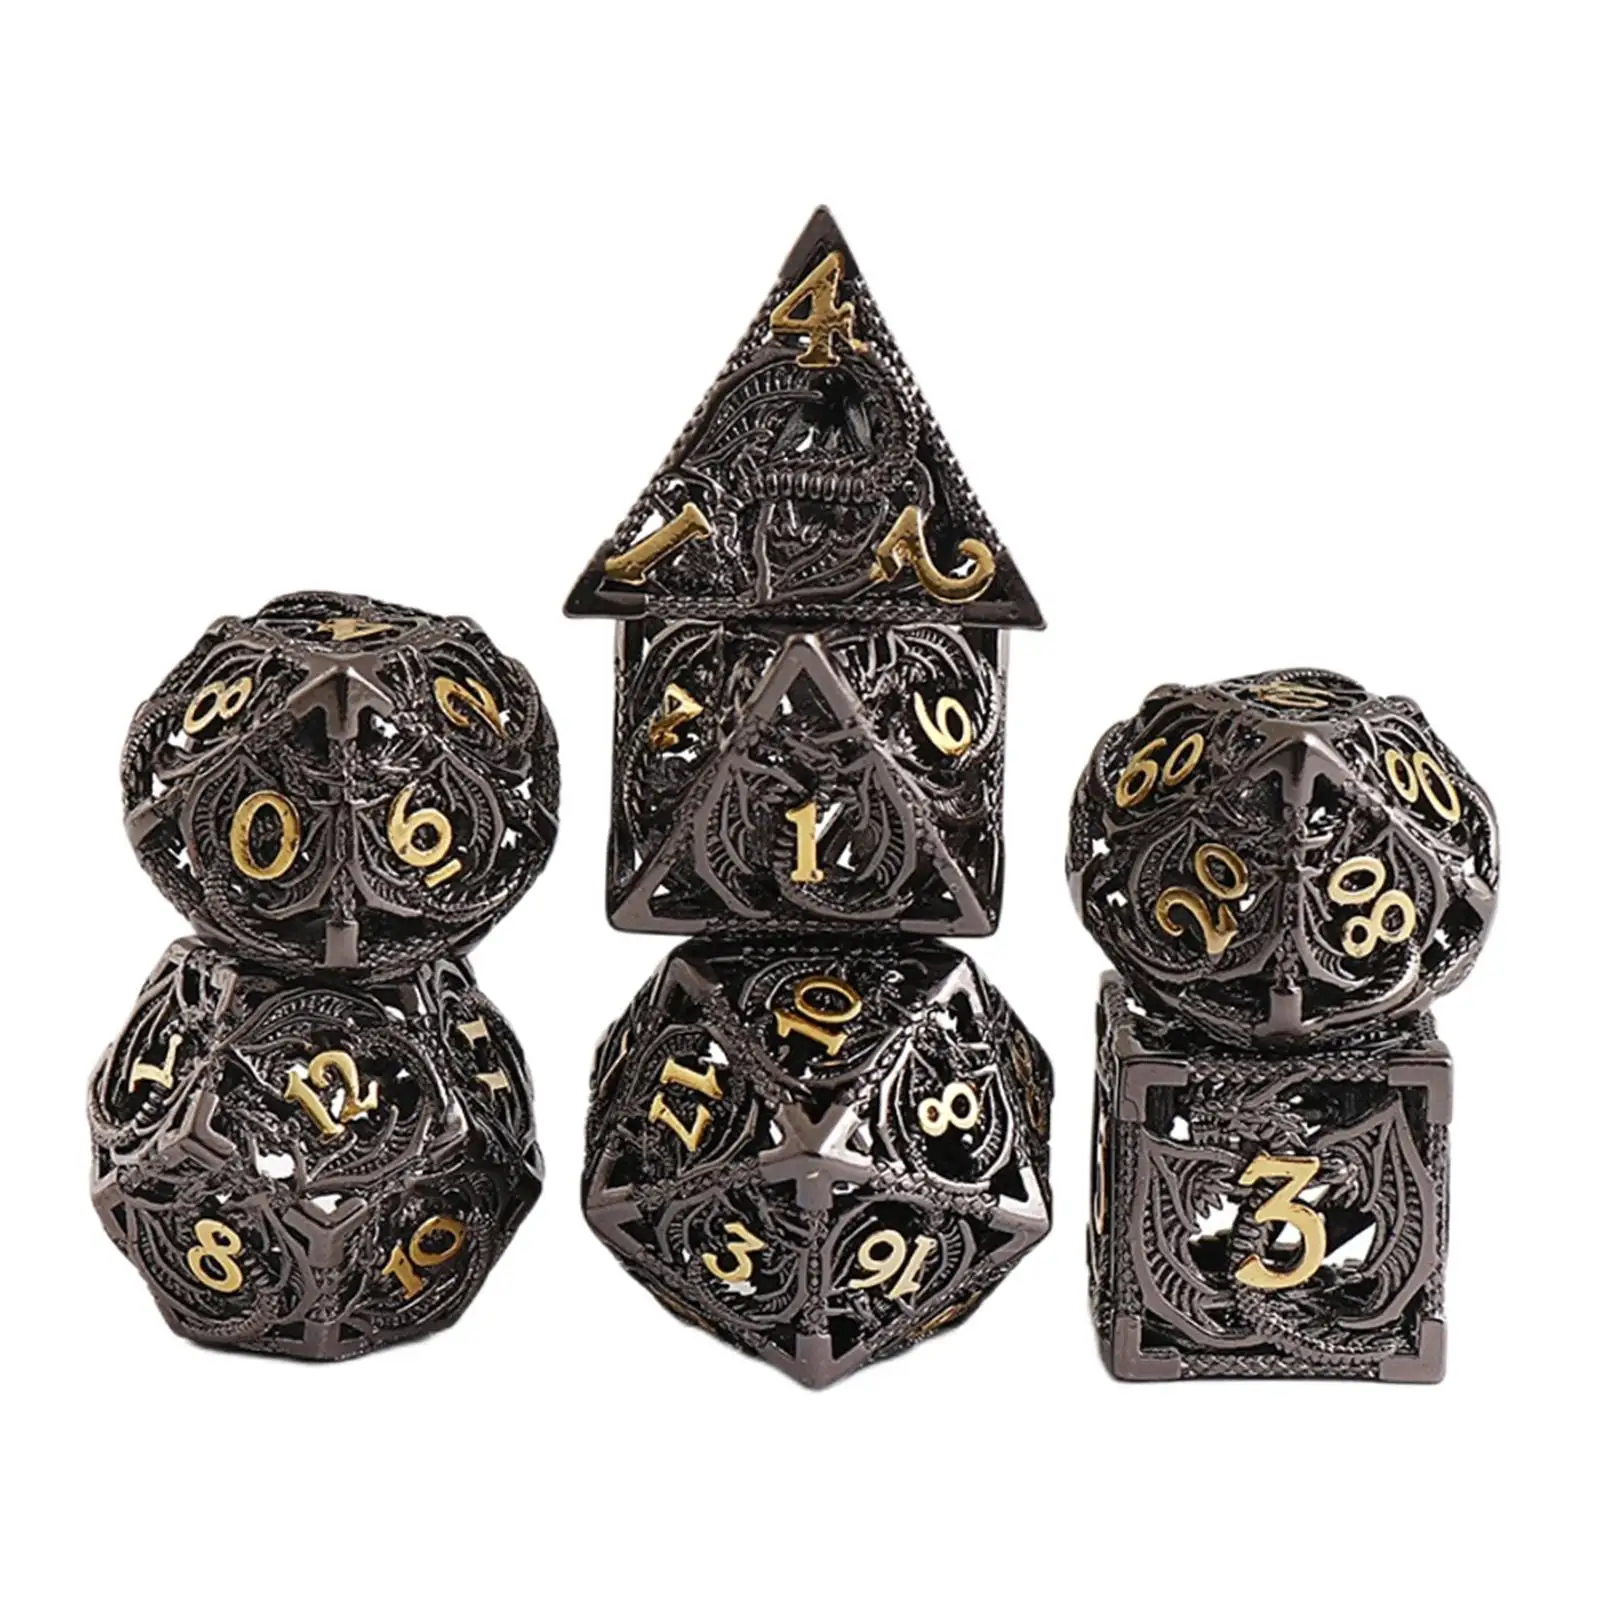 Ancient Copper Hollow-carved DesignMetal Dice Set DND Dice D&D Polyhedral Dice